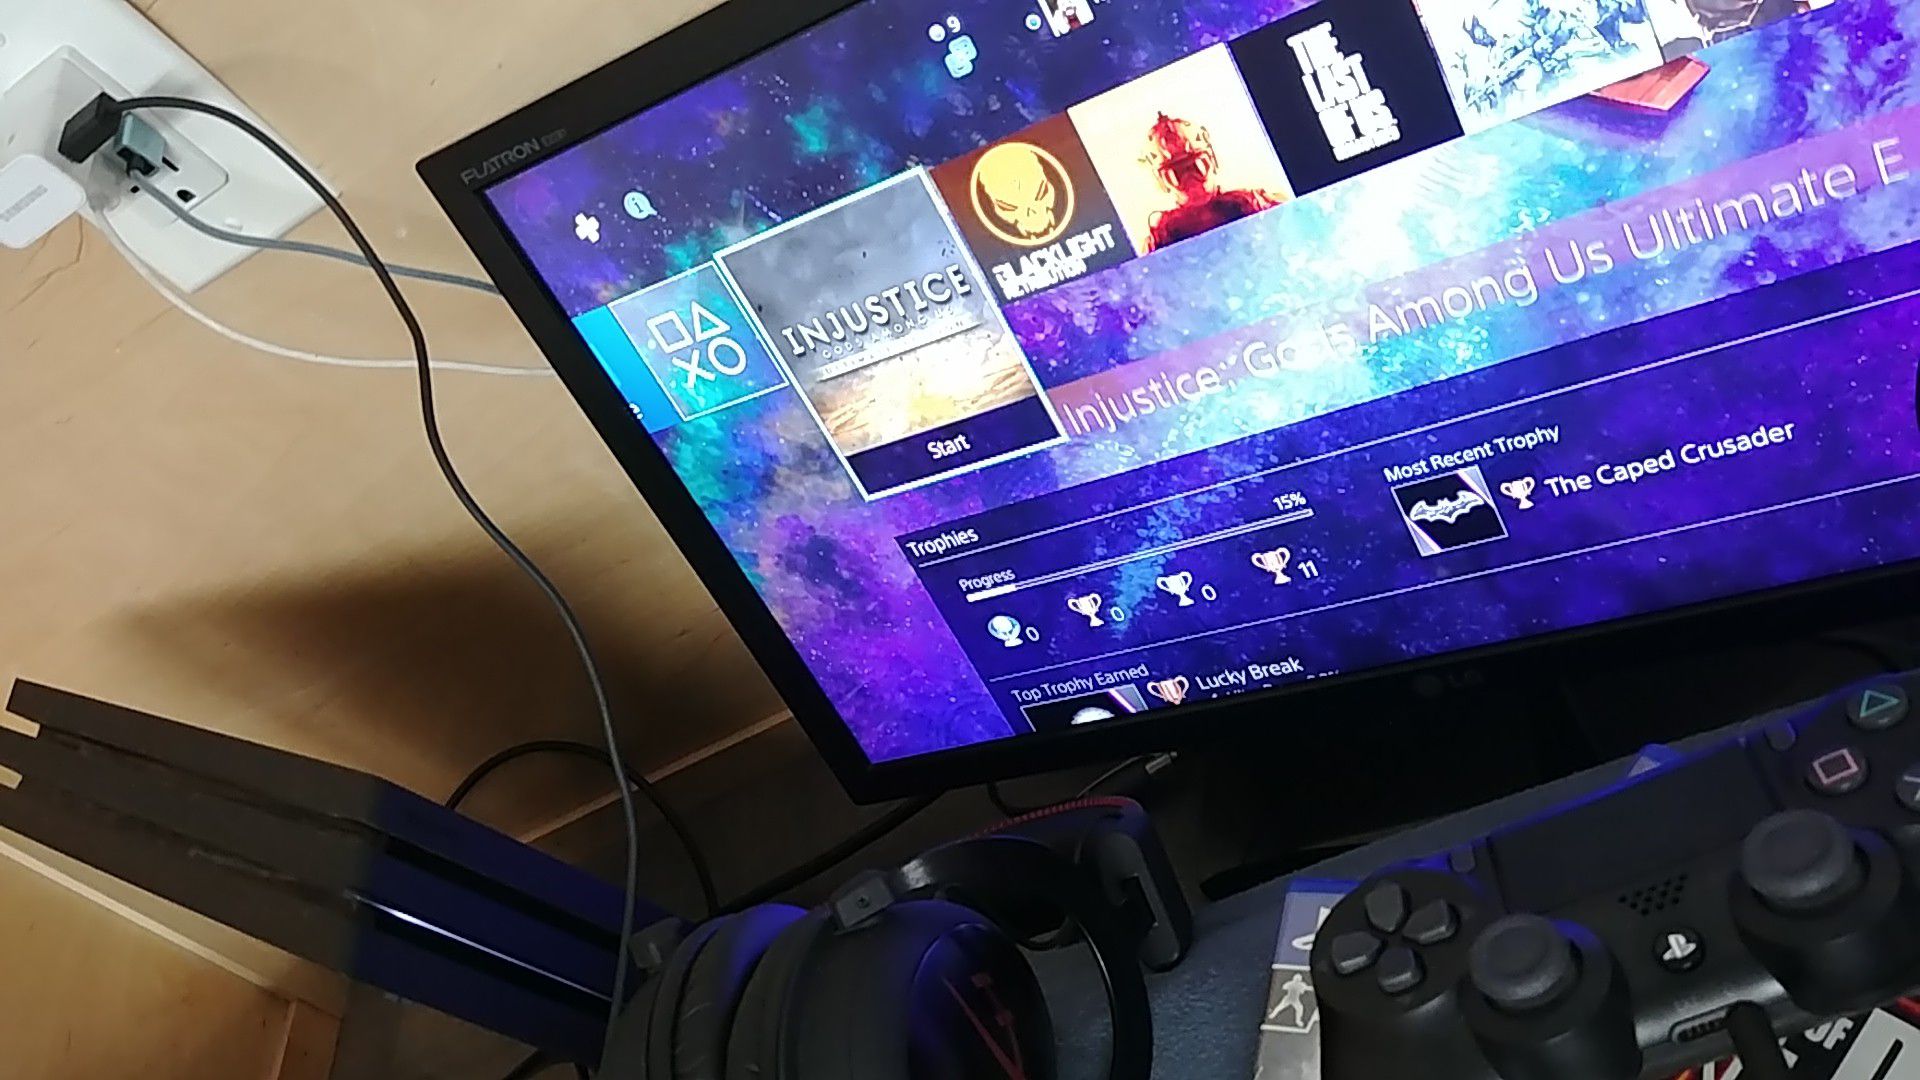 Ps4 pro, games, 22 in 1080p lg monitor